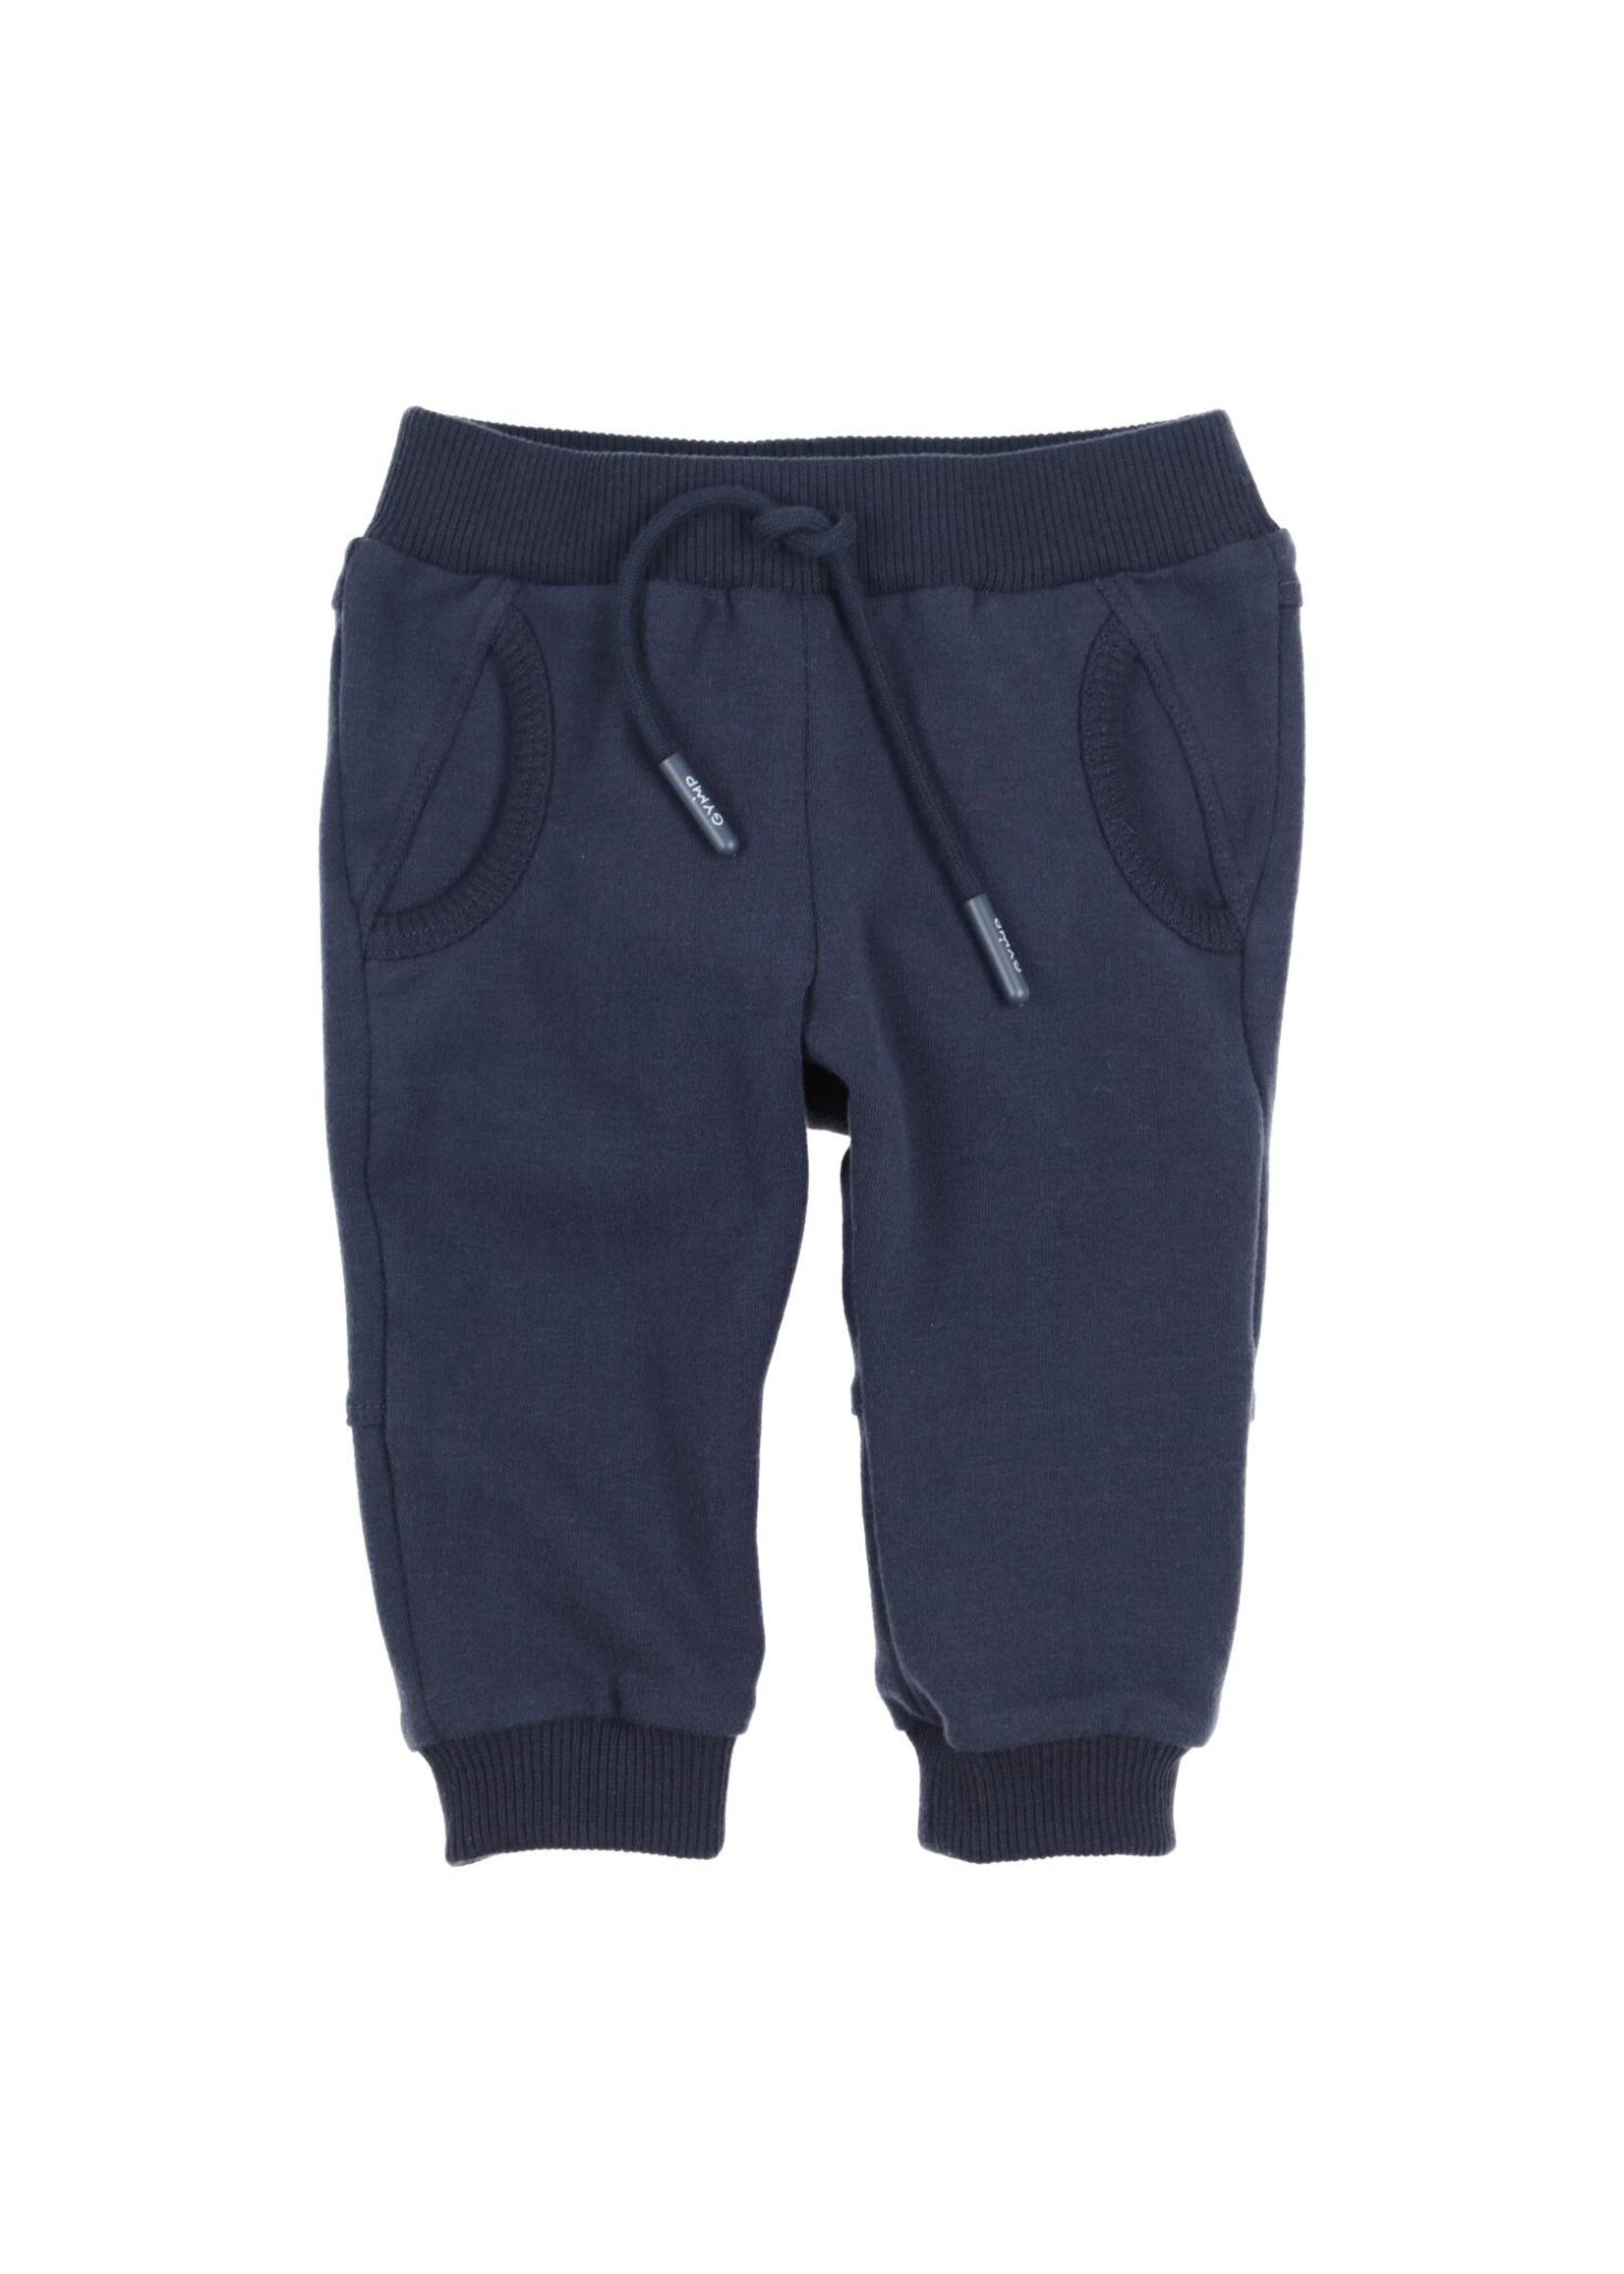 Gymp Boys Trousers Carbon 410-4183-20 Navy